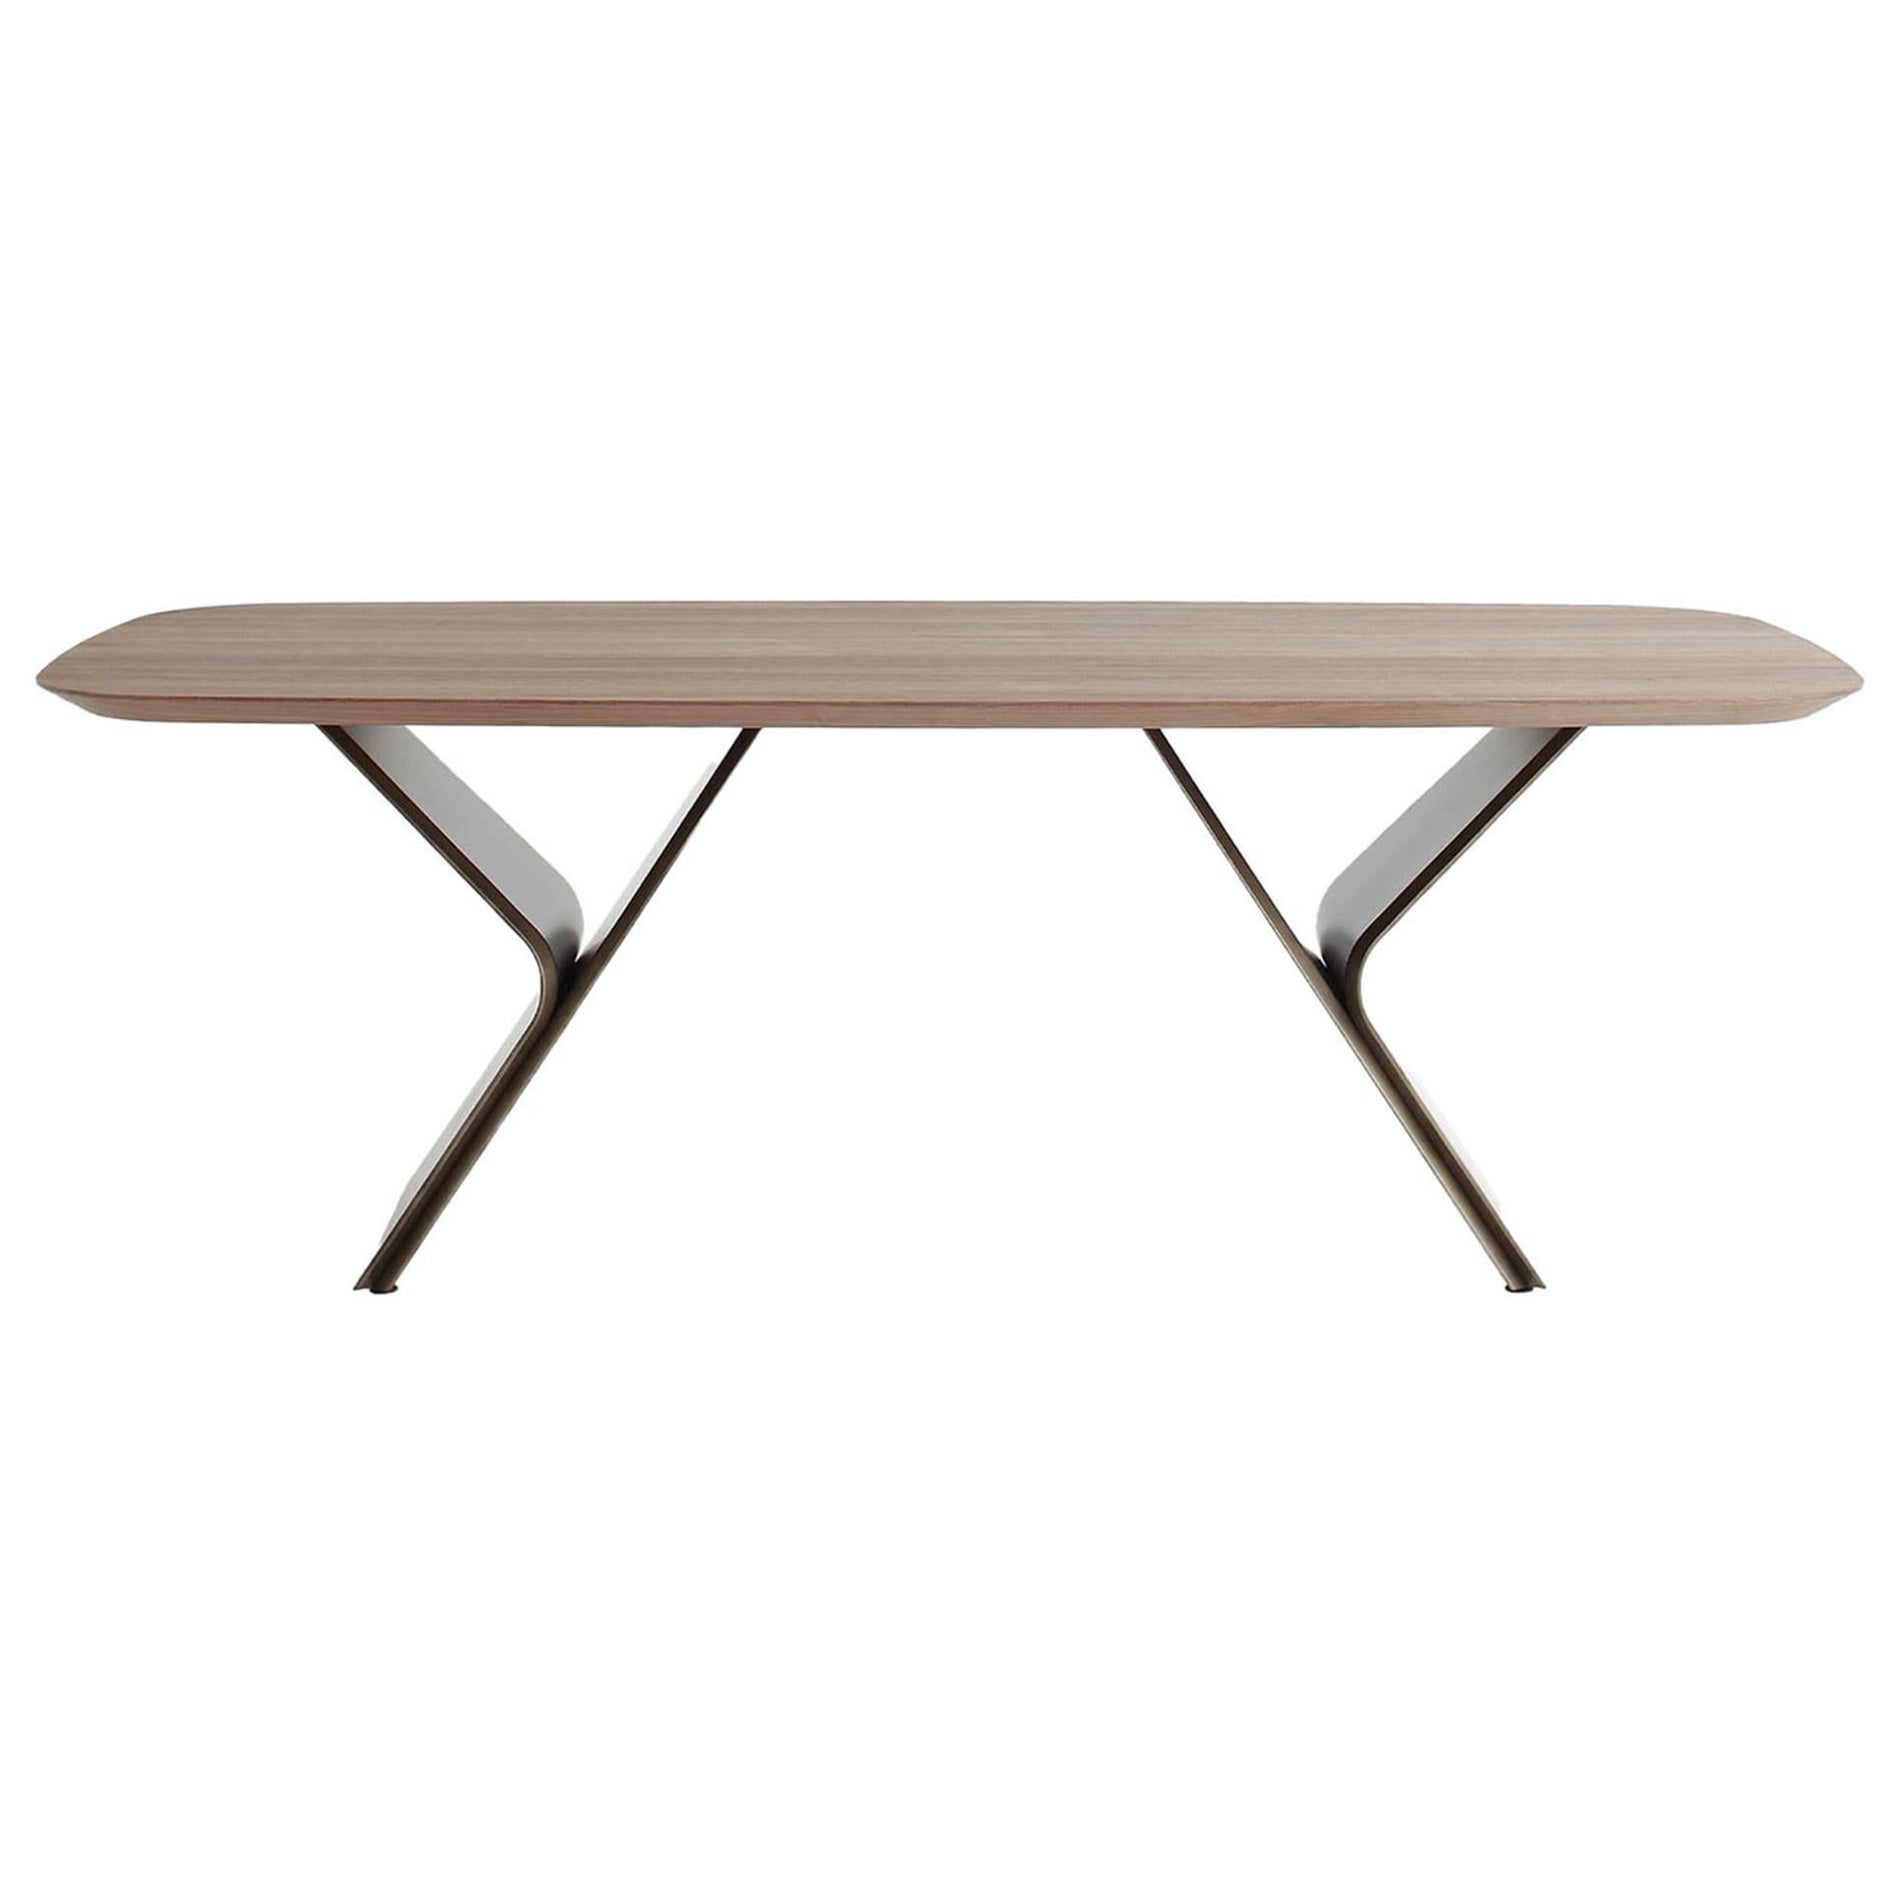 Morica Design Dining Room Tables